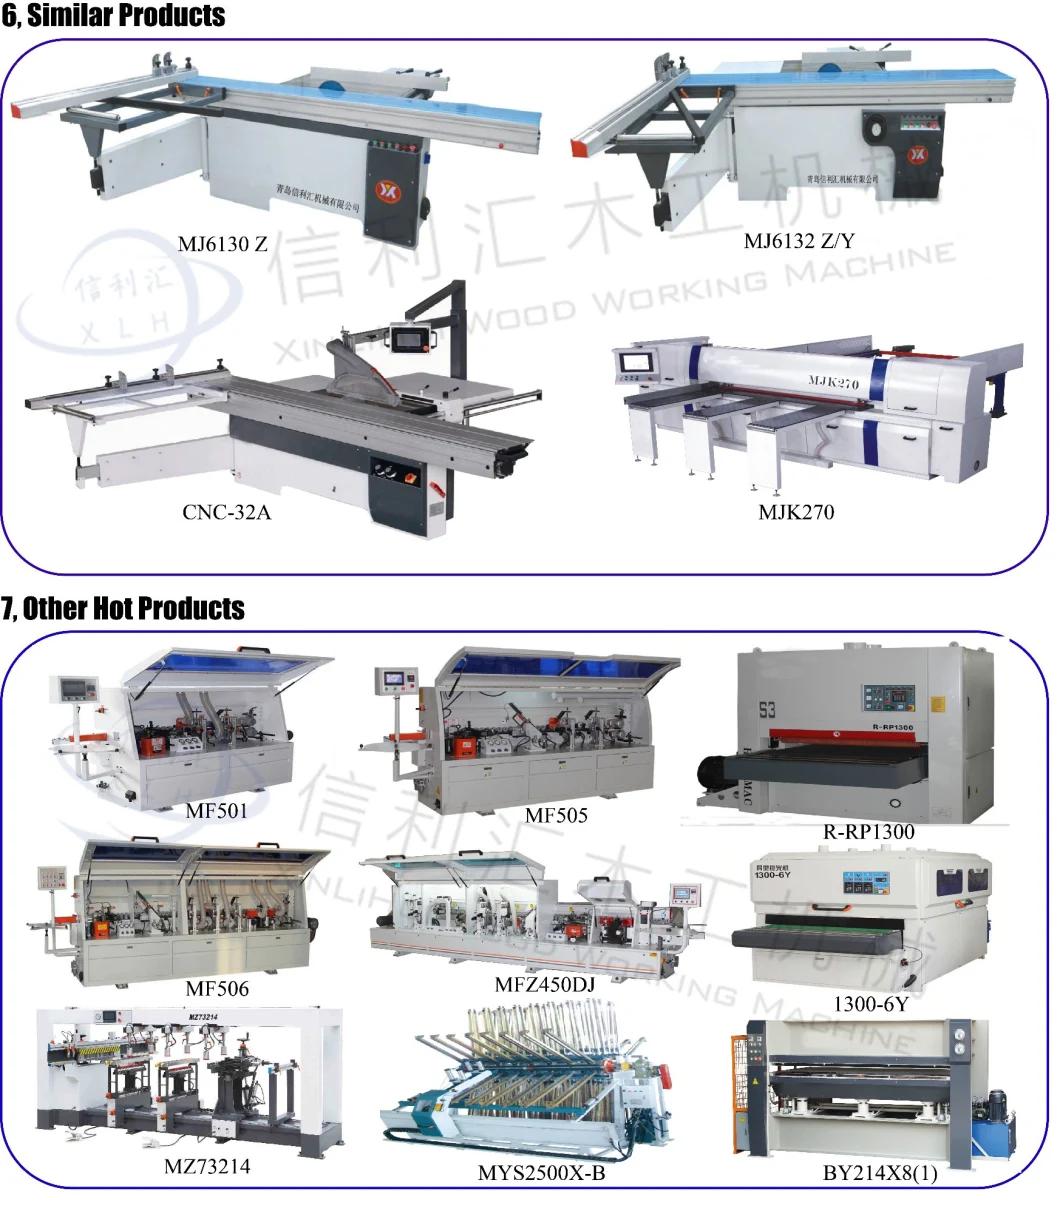 Laminated Wood Woodworking Production Line Wood Based Panel Machinery Table Saw/ Boards Panel Machines Table Saw Cutting Machine